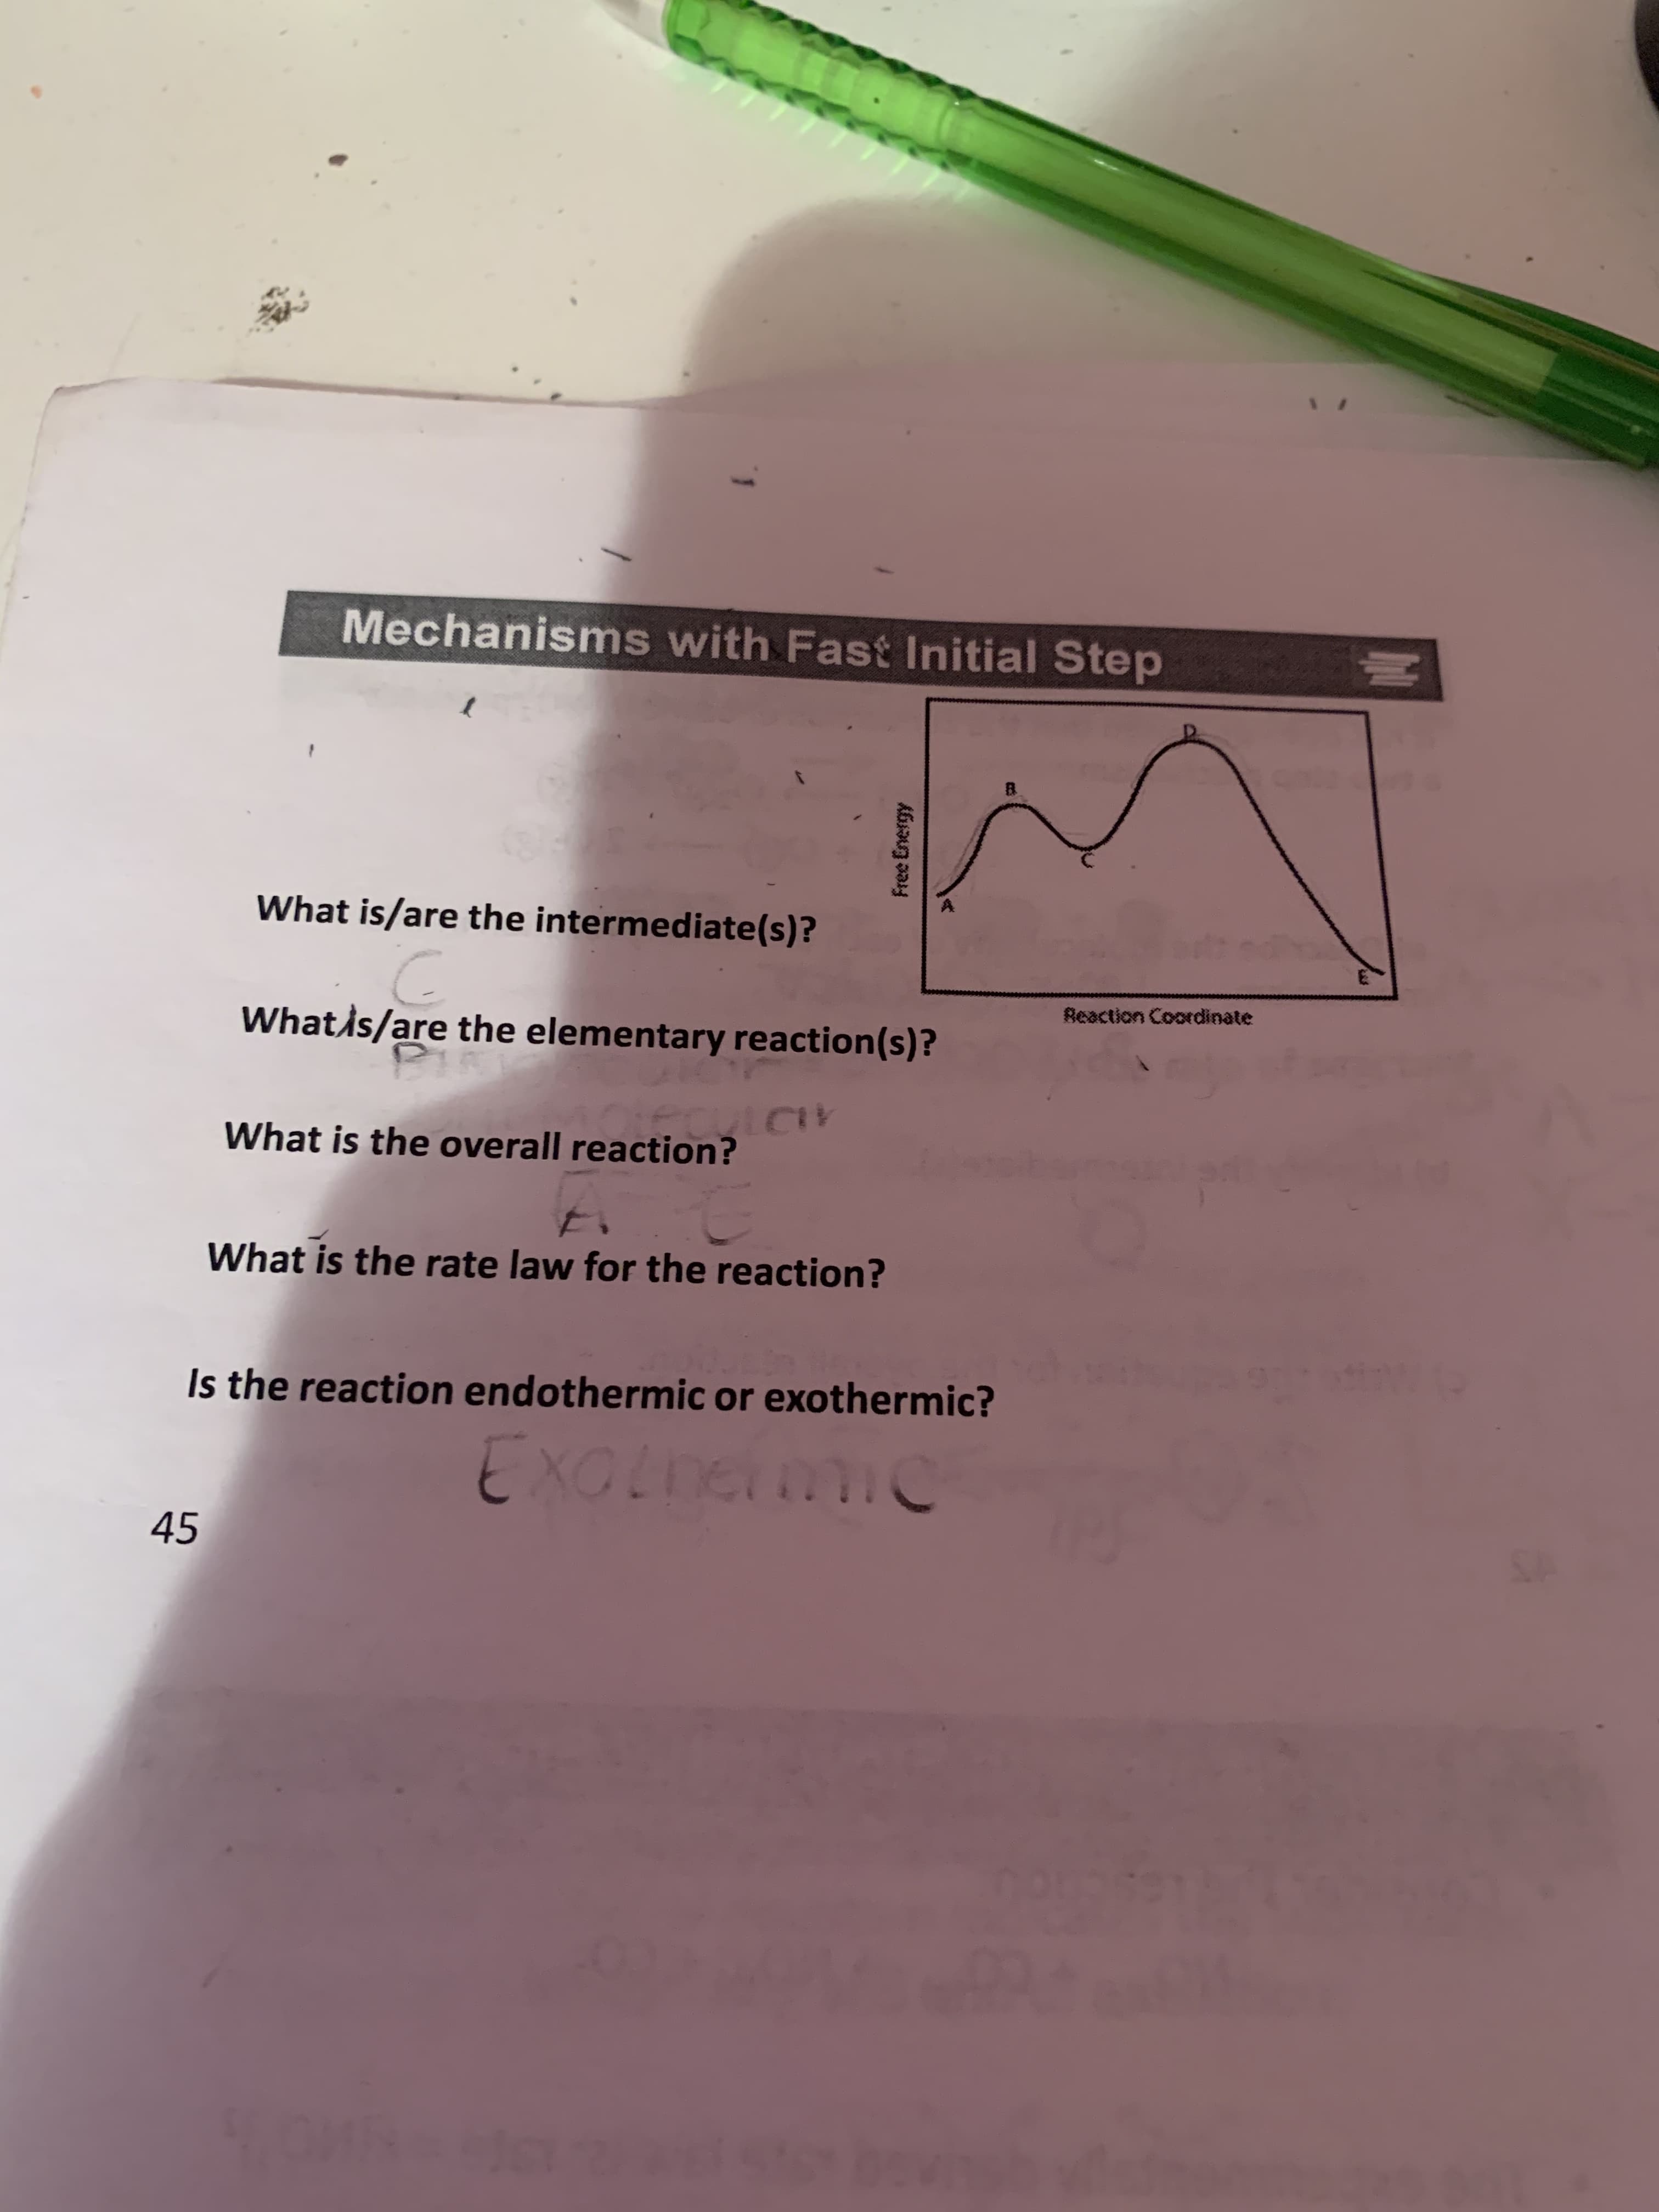 Mechanisms with Fast Initial Step
What is/are the intermediate(s)?
Reaction Coordinate
What/s/are the elementary reaction(s)?
cutCr
What is the overall reaction?
What is the rate law for the reaction?
Is the reaction endothermic or exothermic?
EXOLnermiC
45
bevin
Free Energy
